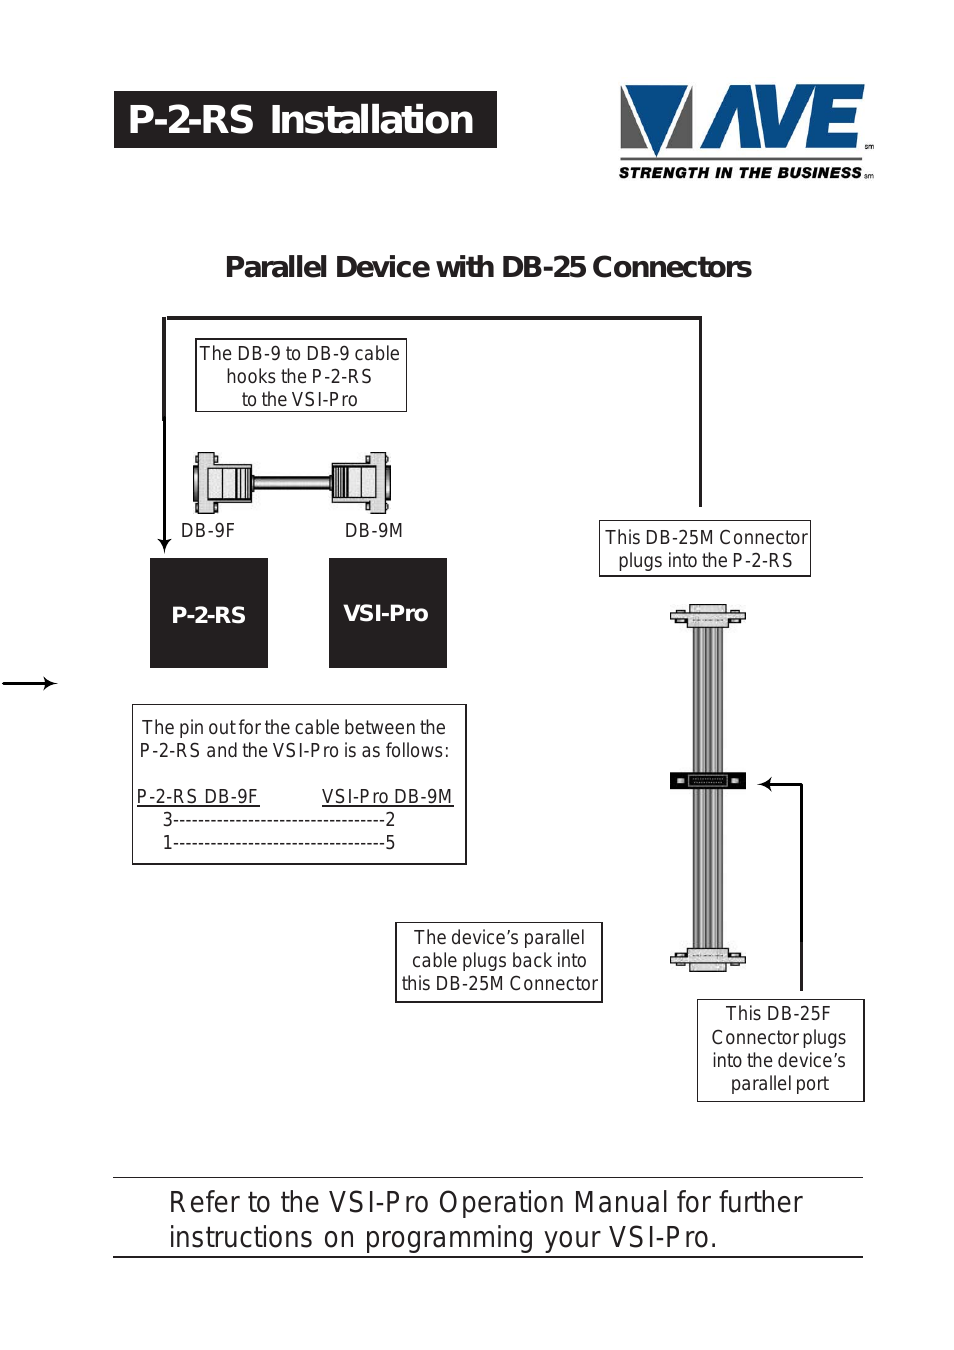 Parallel Device with DB-25 Connectors P-2-RS